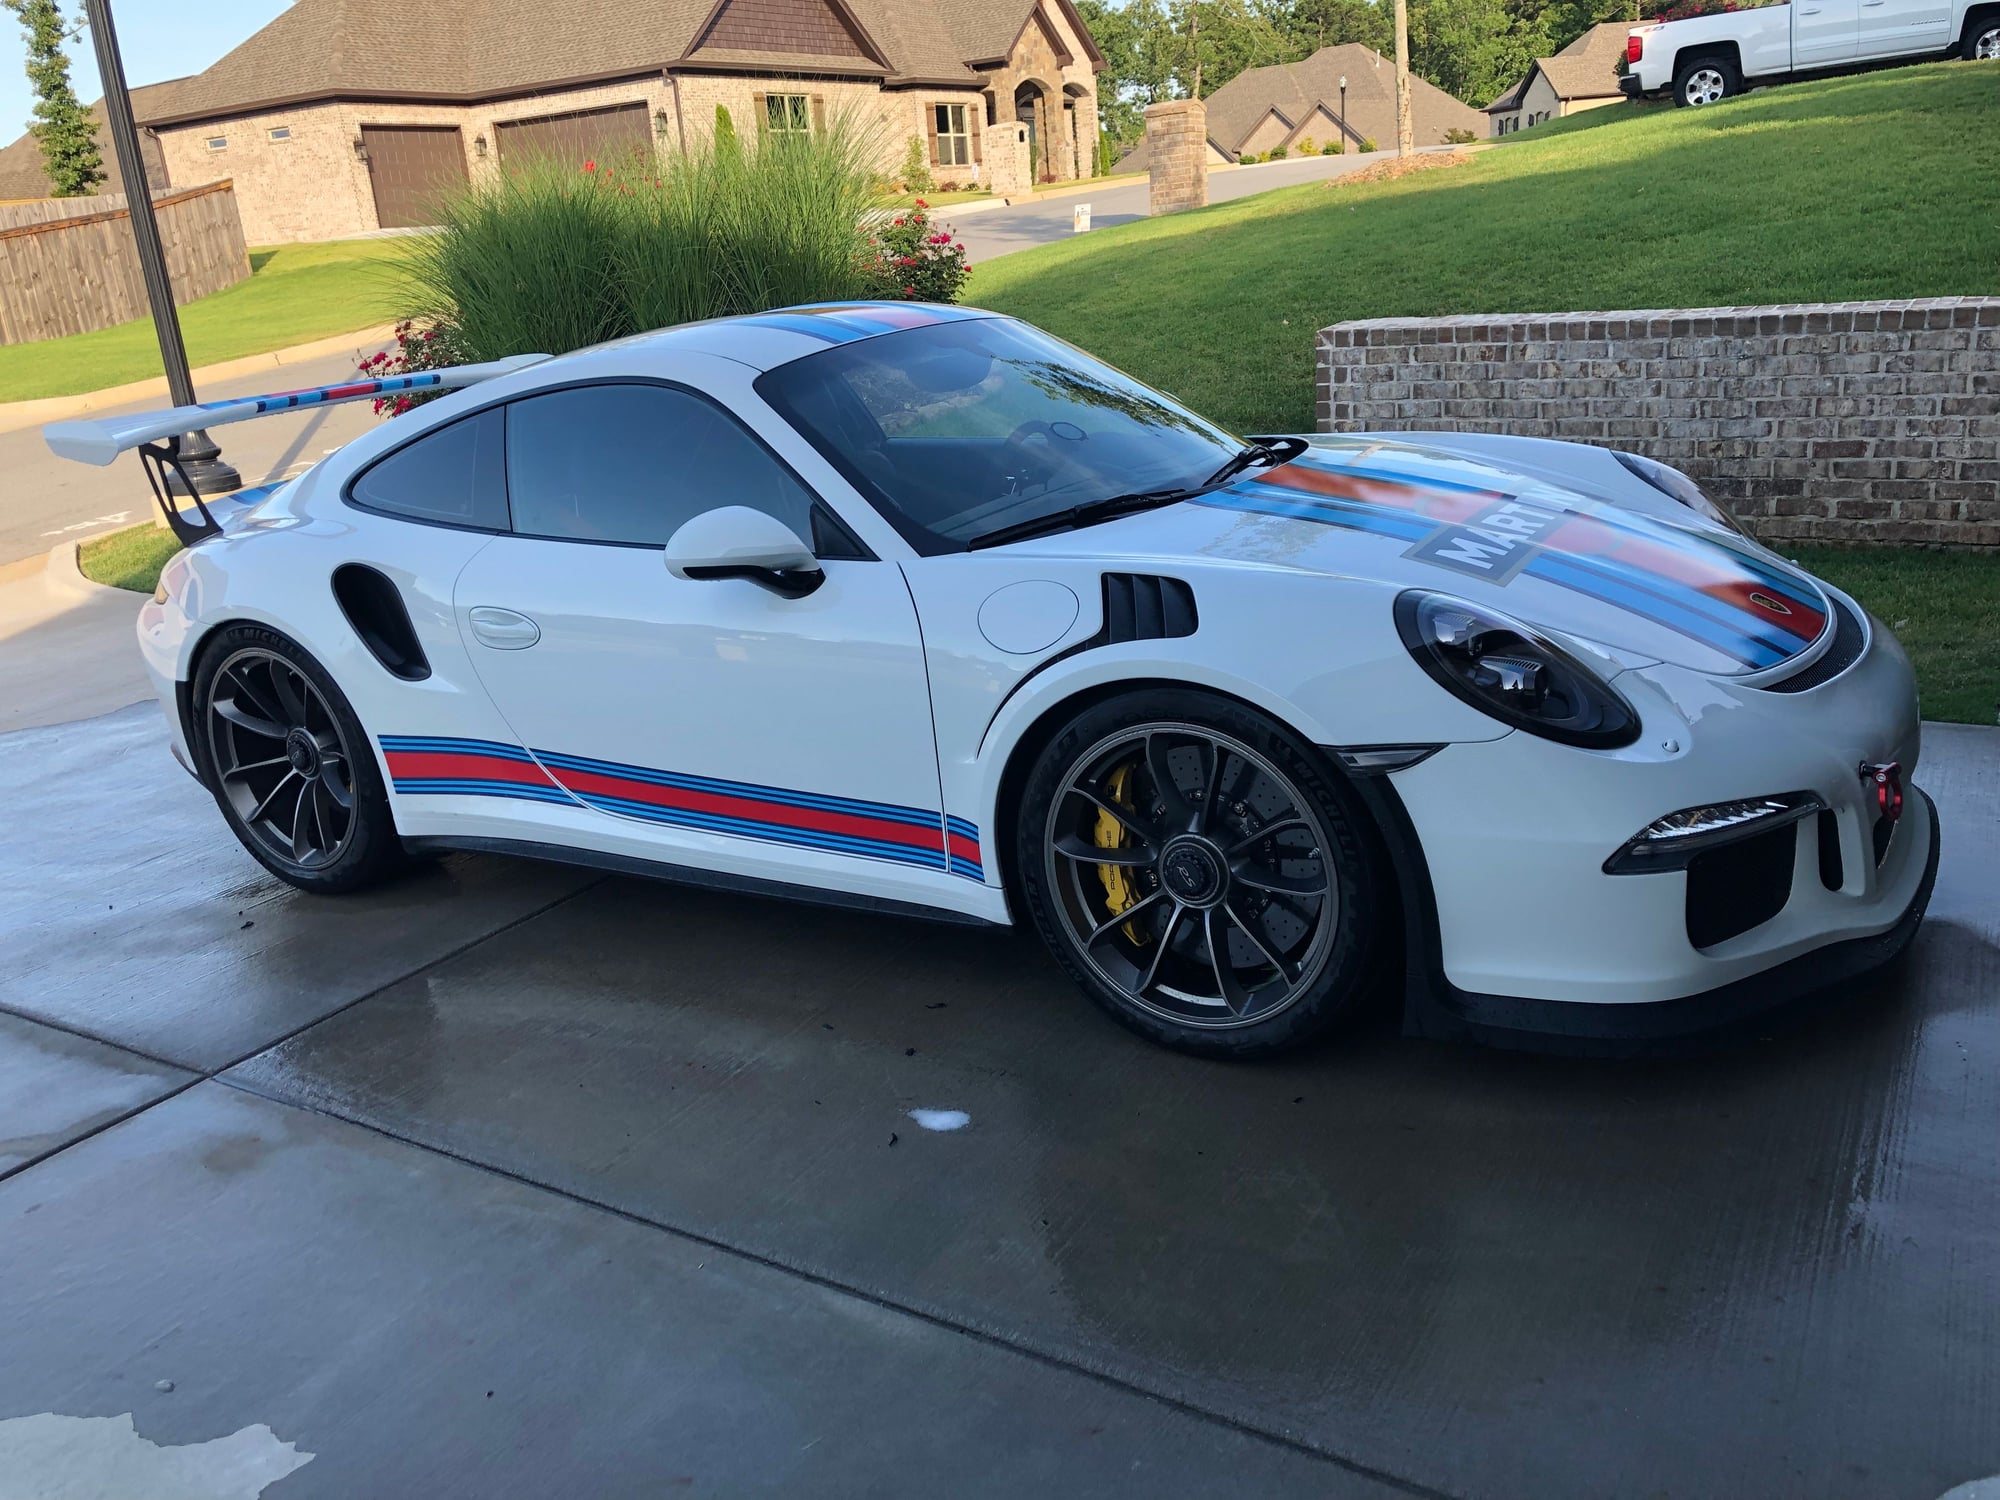 2016 Porsche GT3 - 2016 Porsche GT3 RS Martini Livery PCCB excellent - Used - VIN WPOAF2A92GS192502 - 6,900 Miles - Little Rock, AR 72223, United States